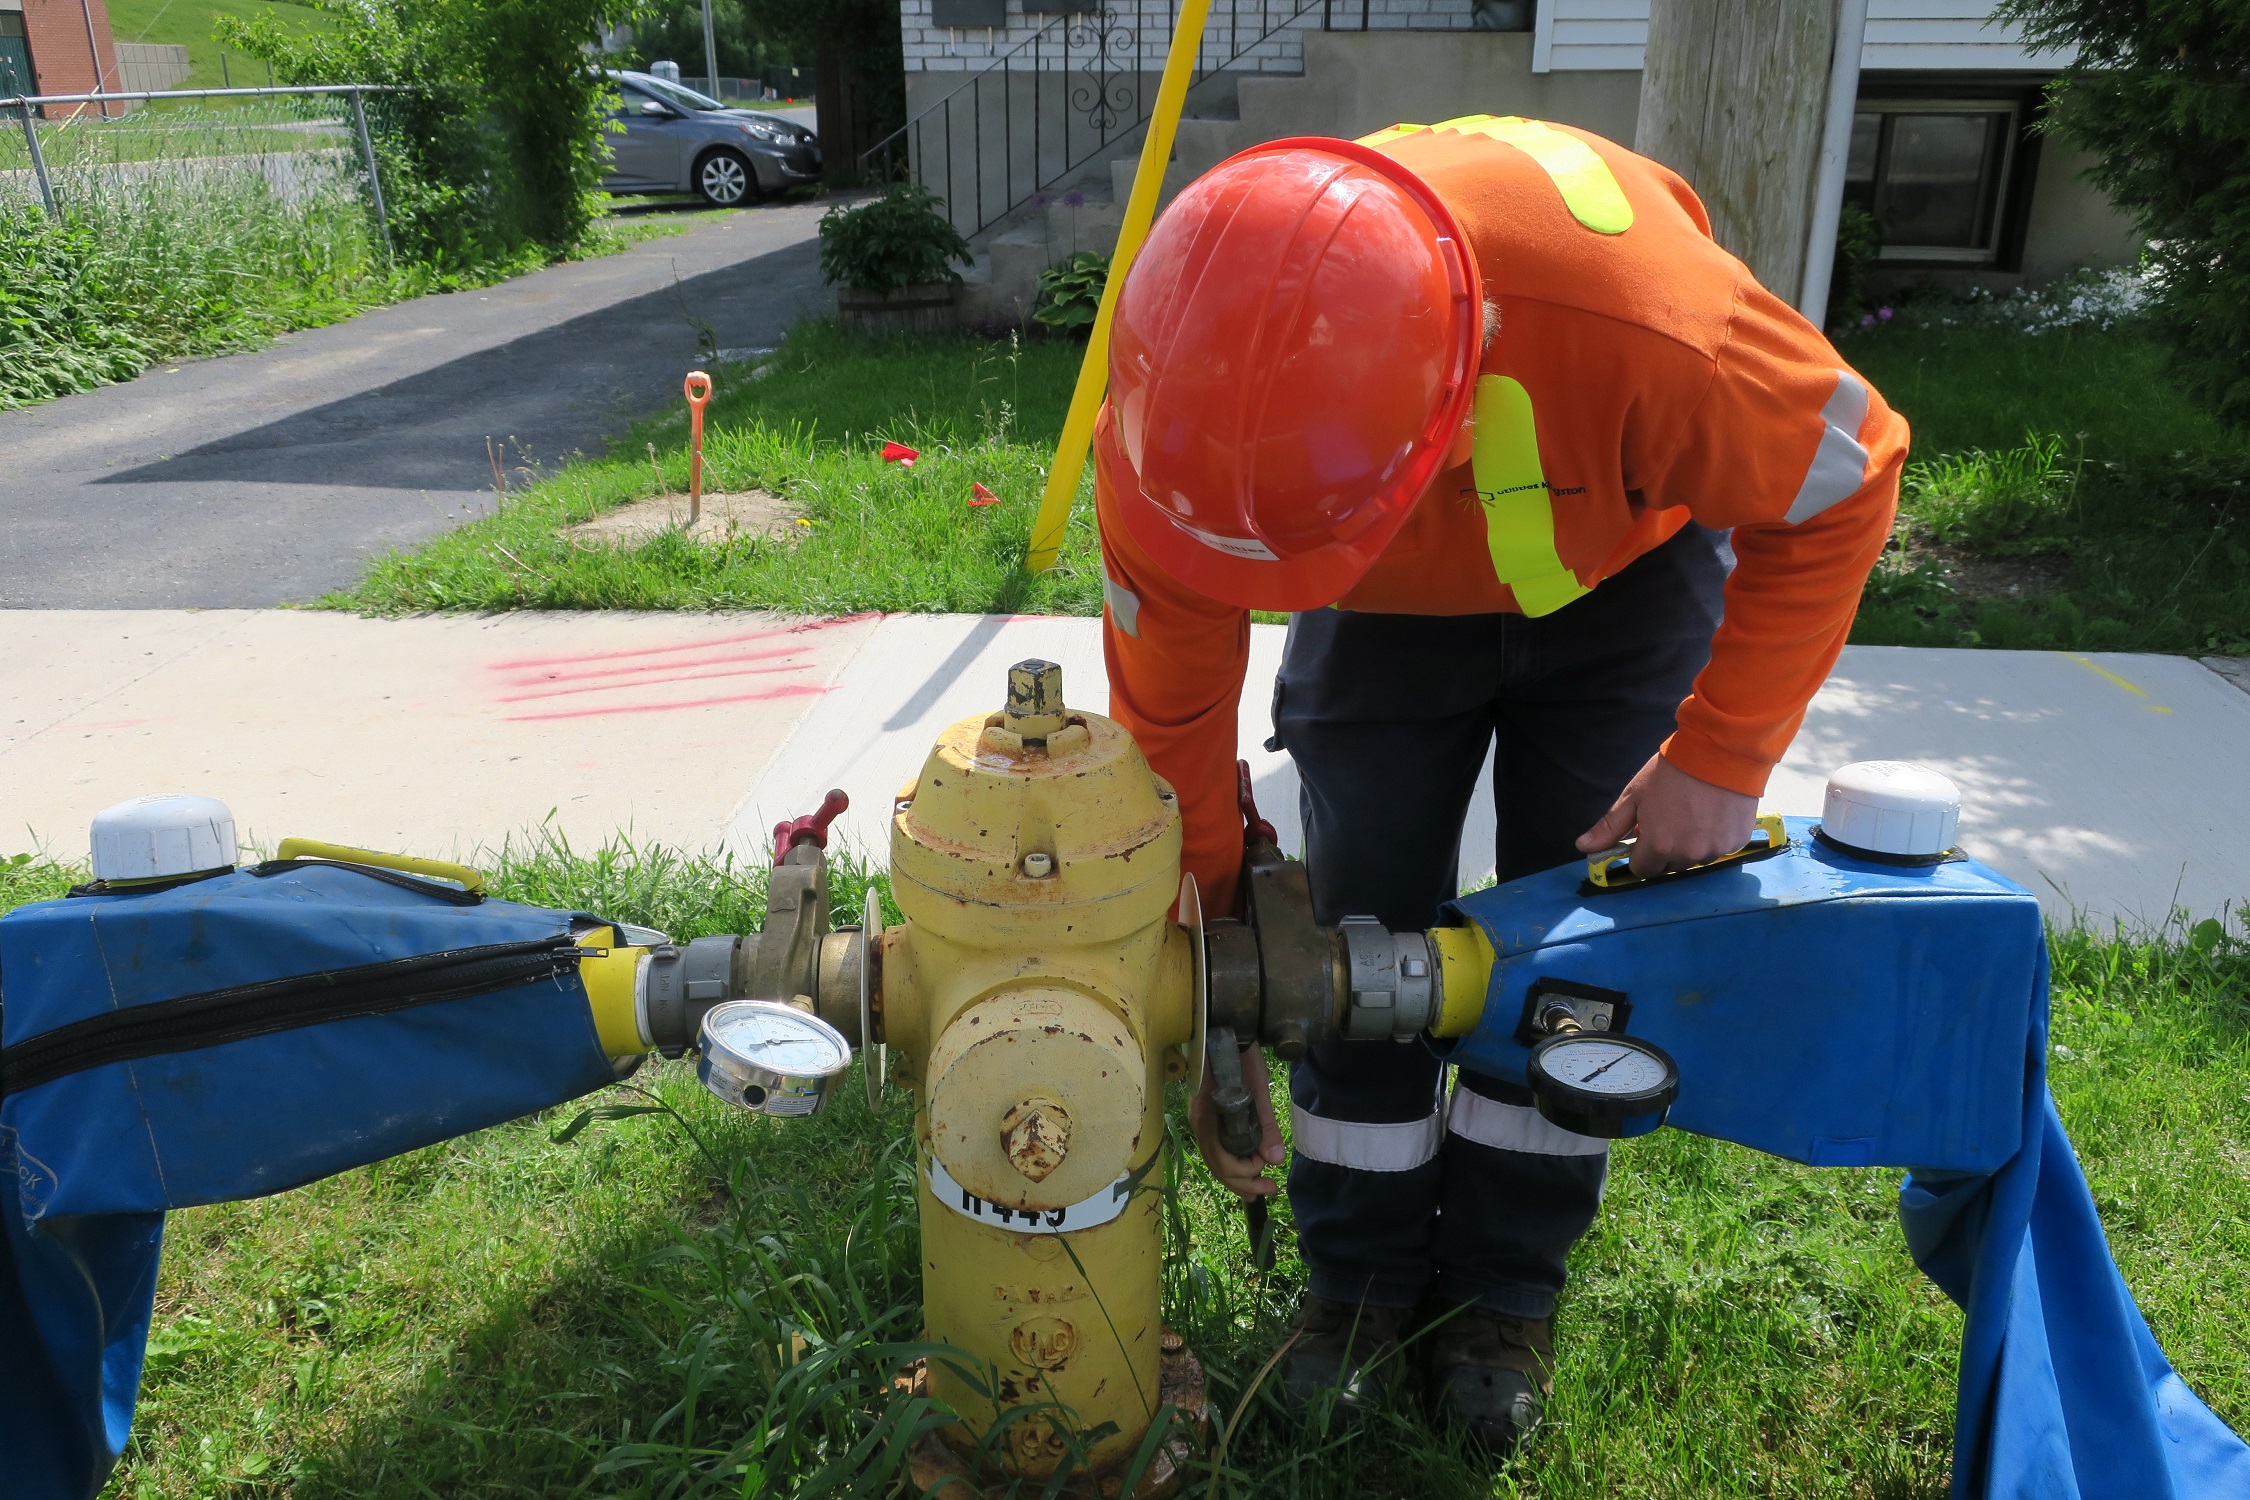 Utilities Kingston is inspecting and rating hydrants to uphold our high quality drinking water system and to support fire protection